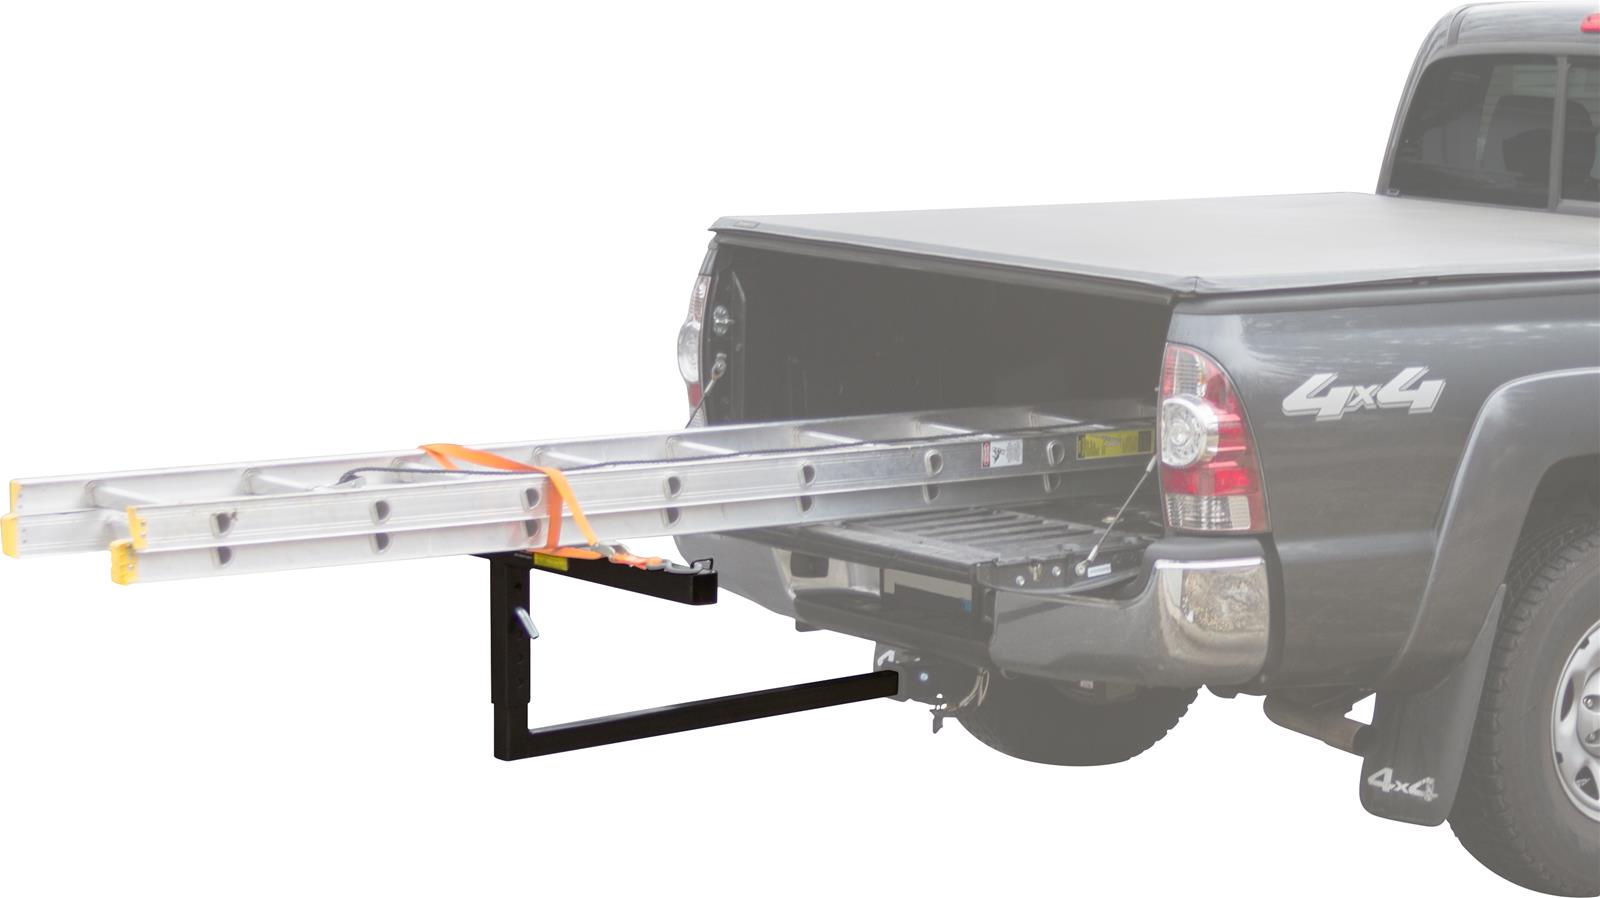 Discount Ramps Truck Bed Extender Hitch Mount